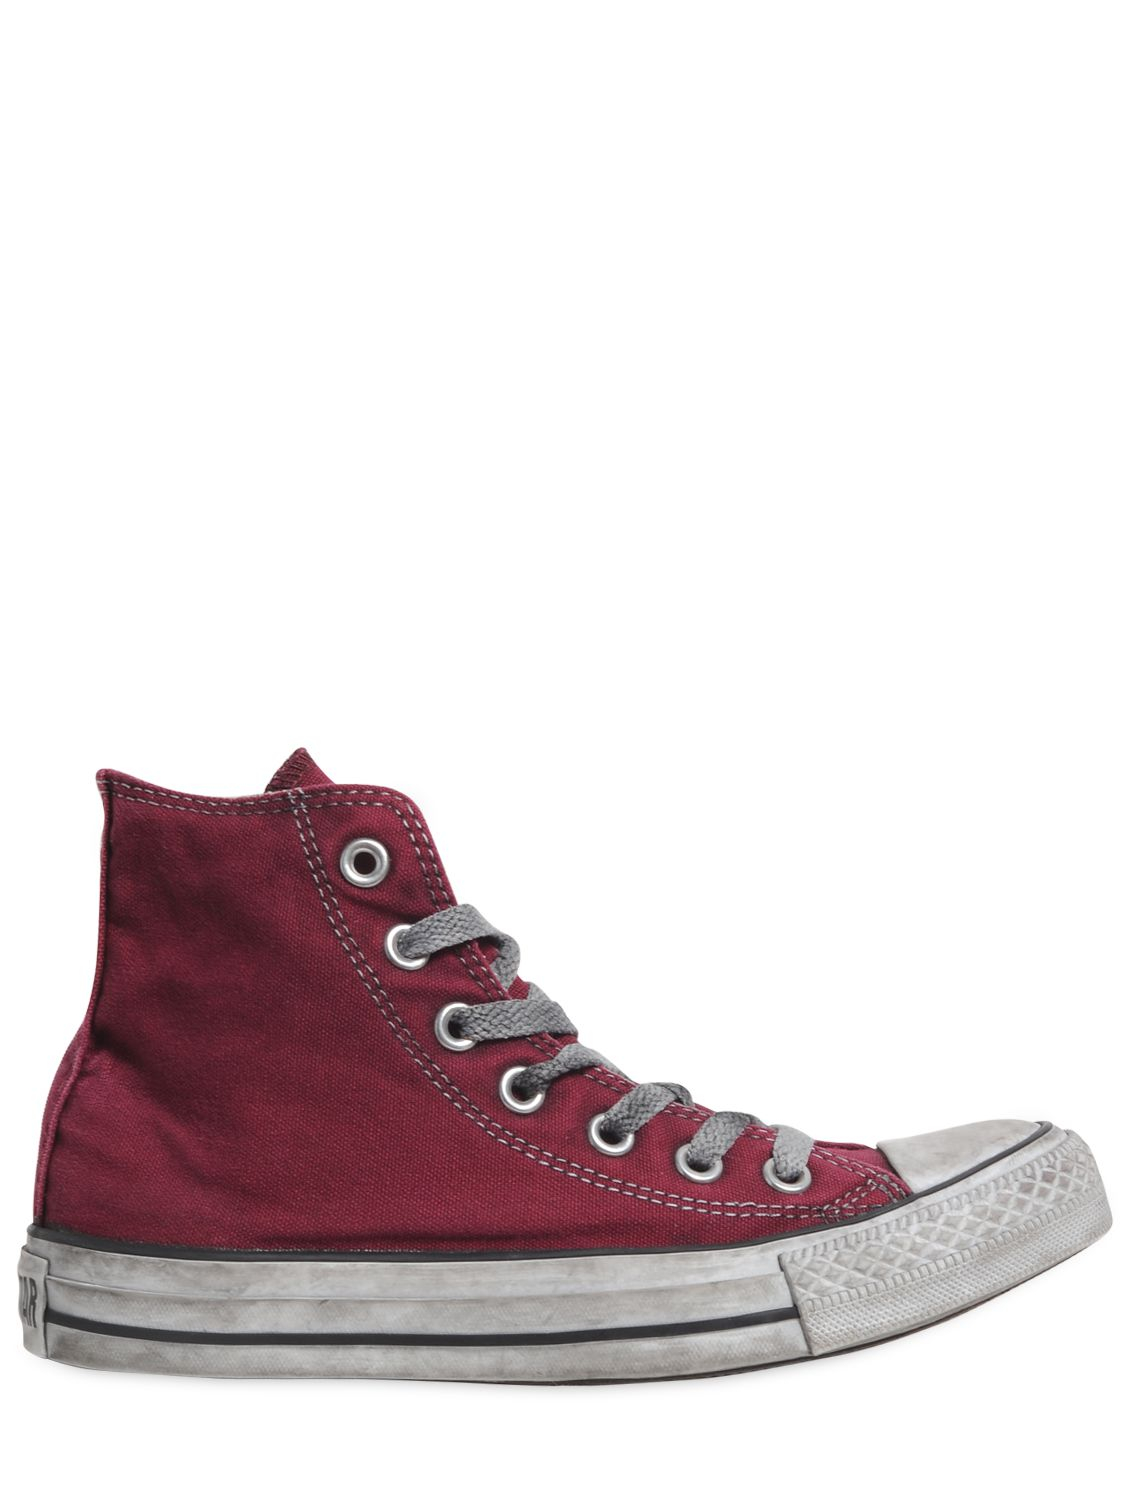 Converse Limited Edition All Stars Sneakers in Bordeaux (Red) for Men - Lyst